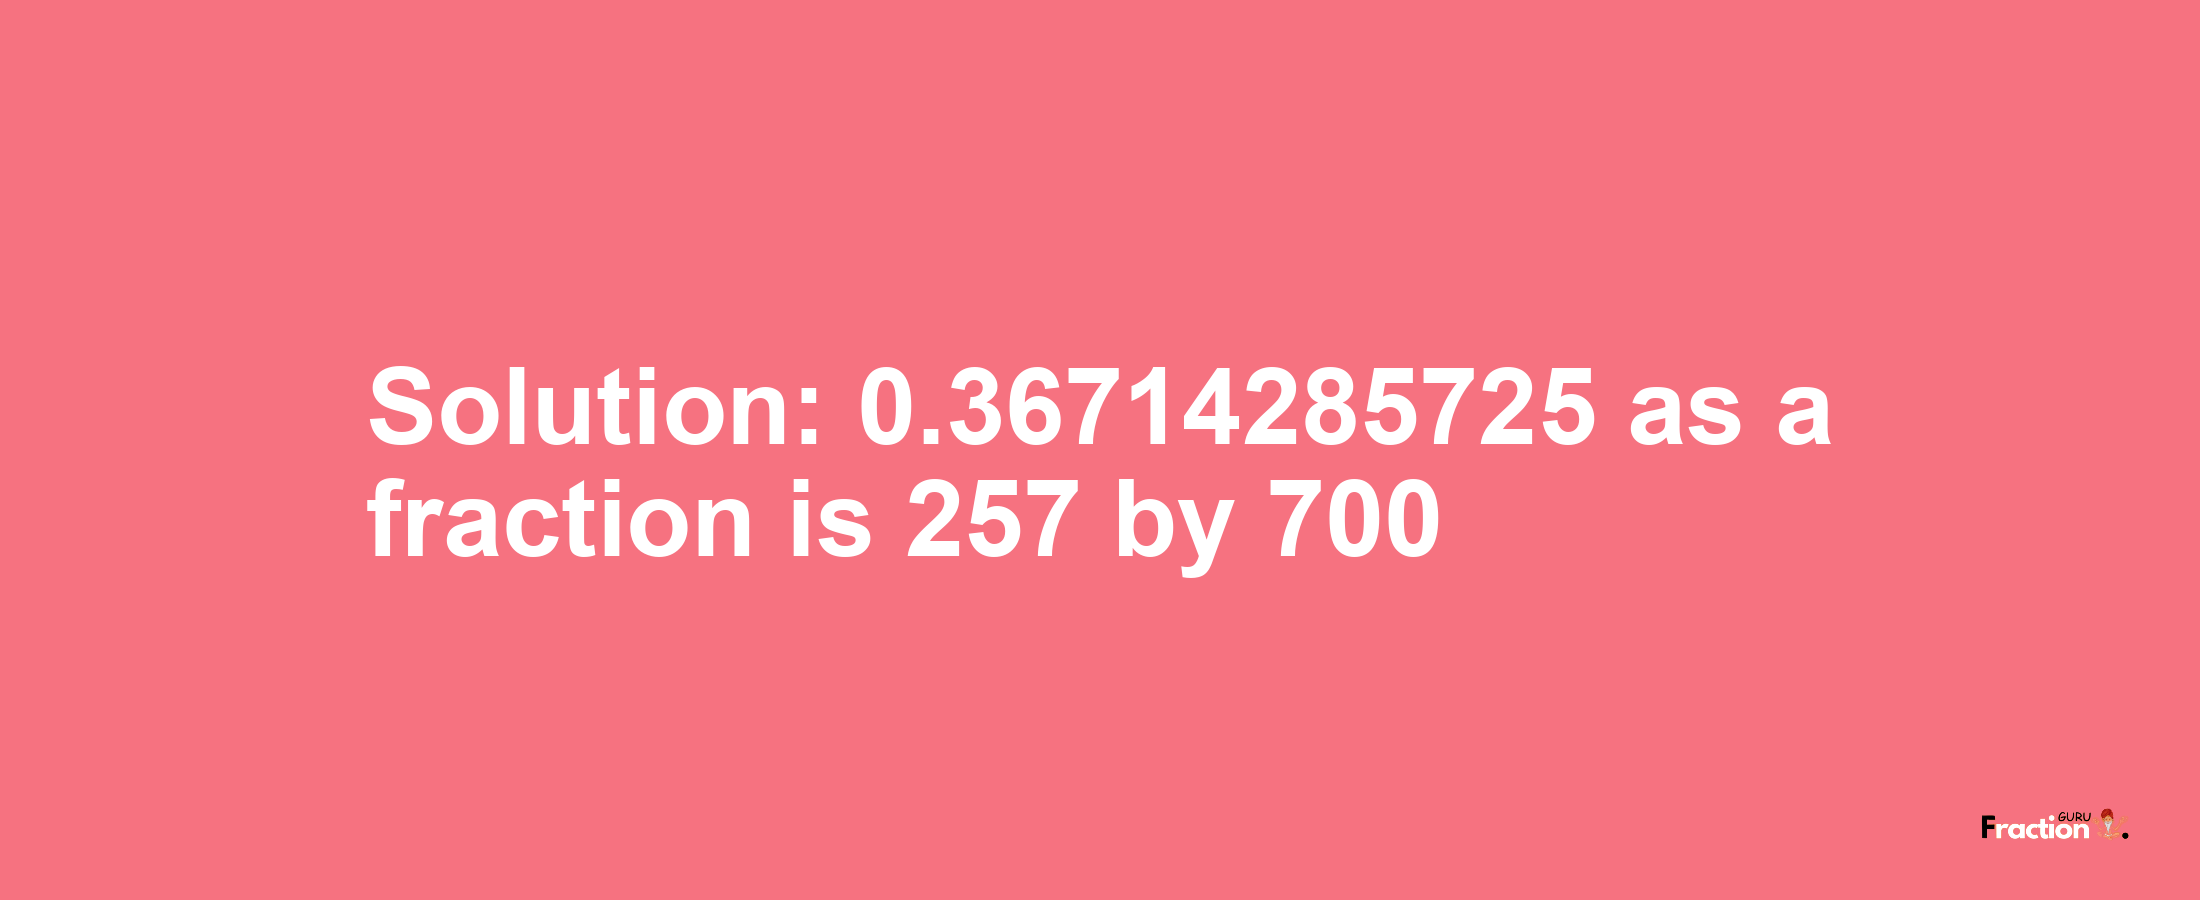 Solution:0.36714285725 as a fraction is 257/700